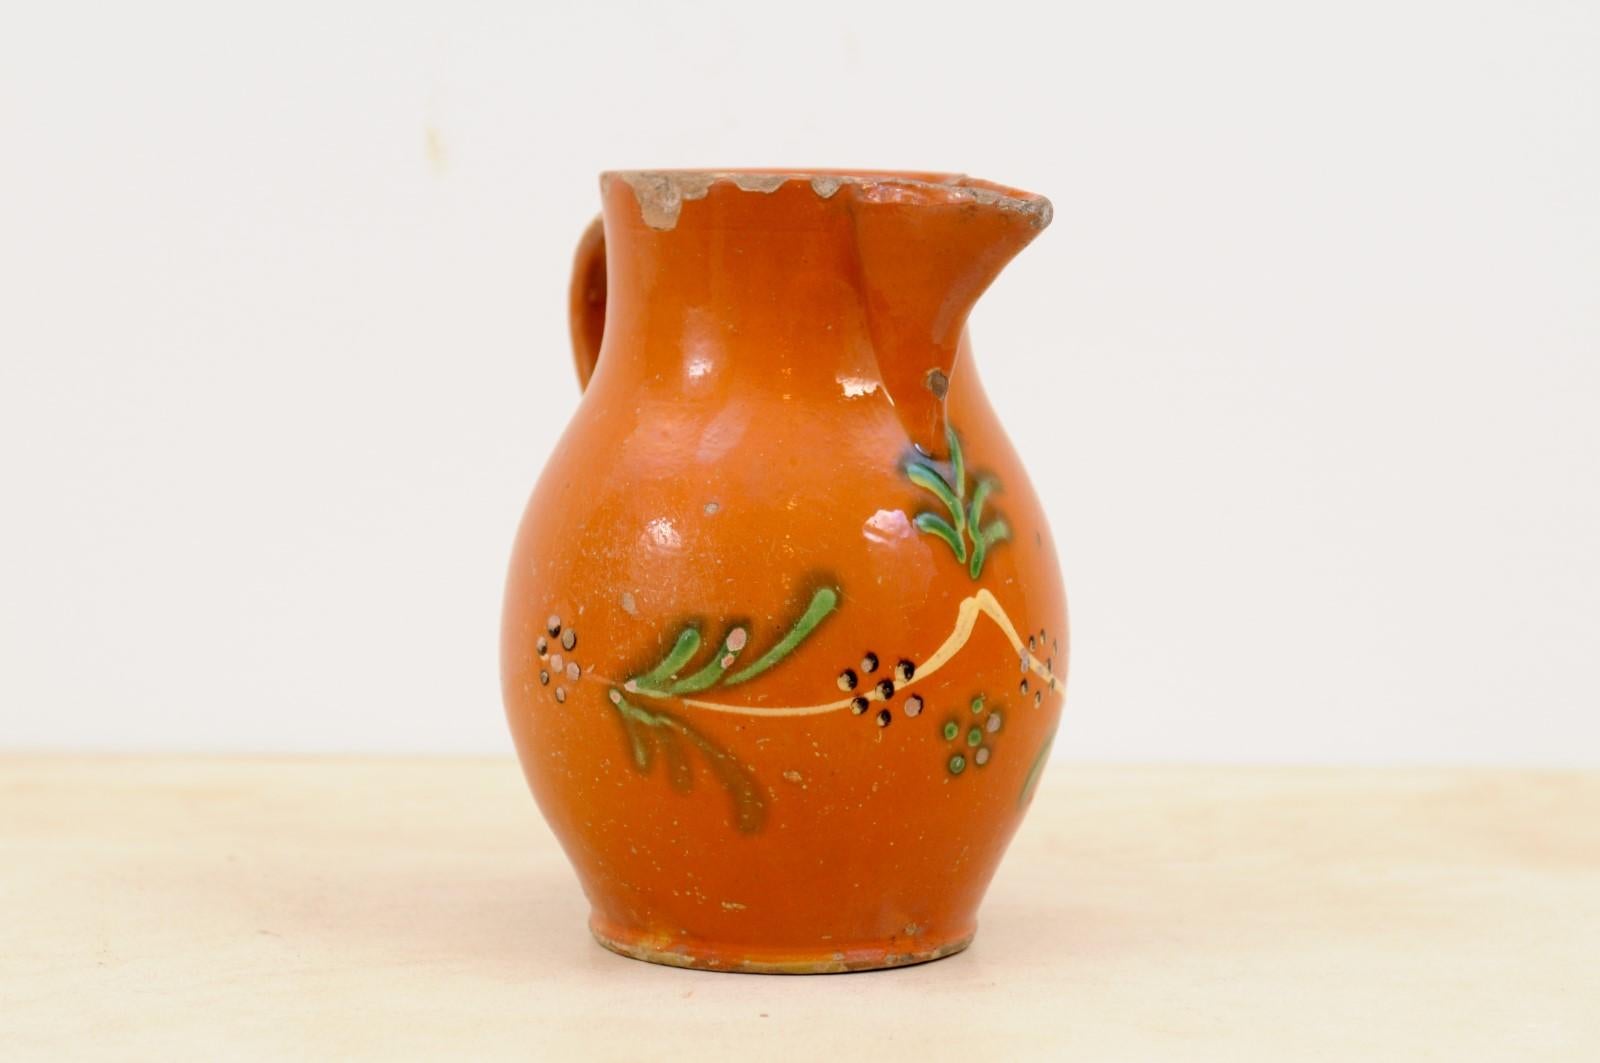 Rustic French 19th Century Redware Floral Pitcher with Orange, Cream and Green Glaze For Sale